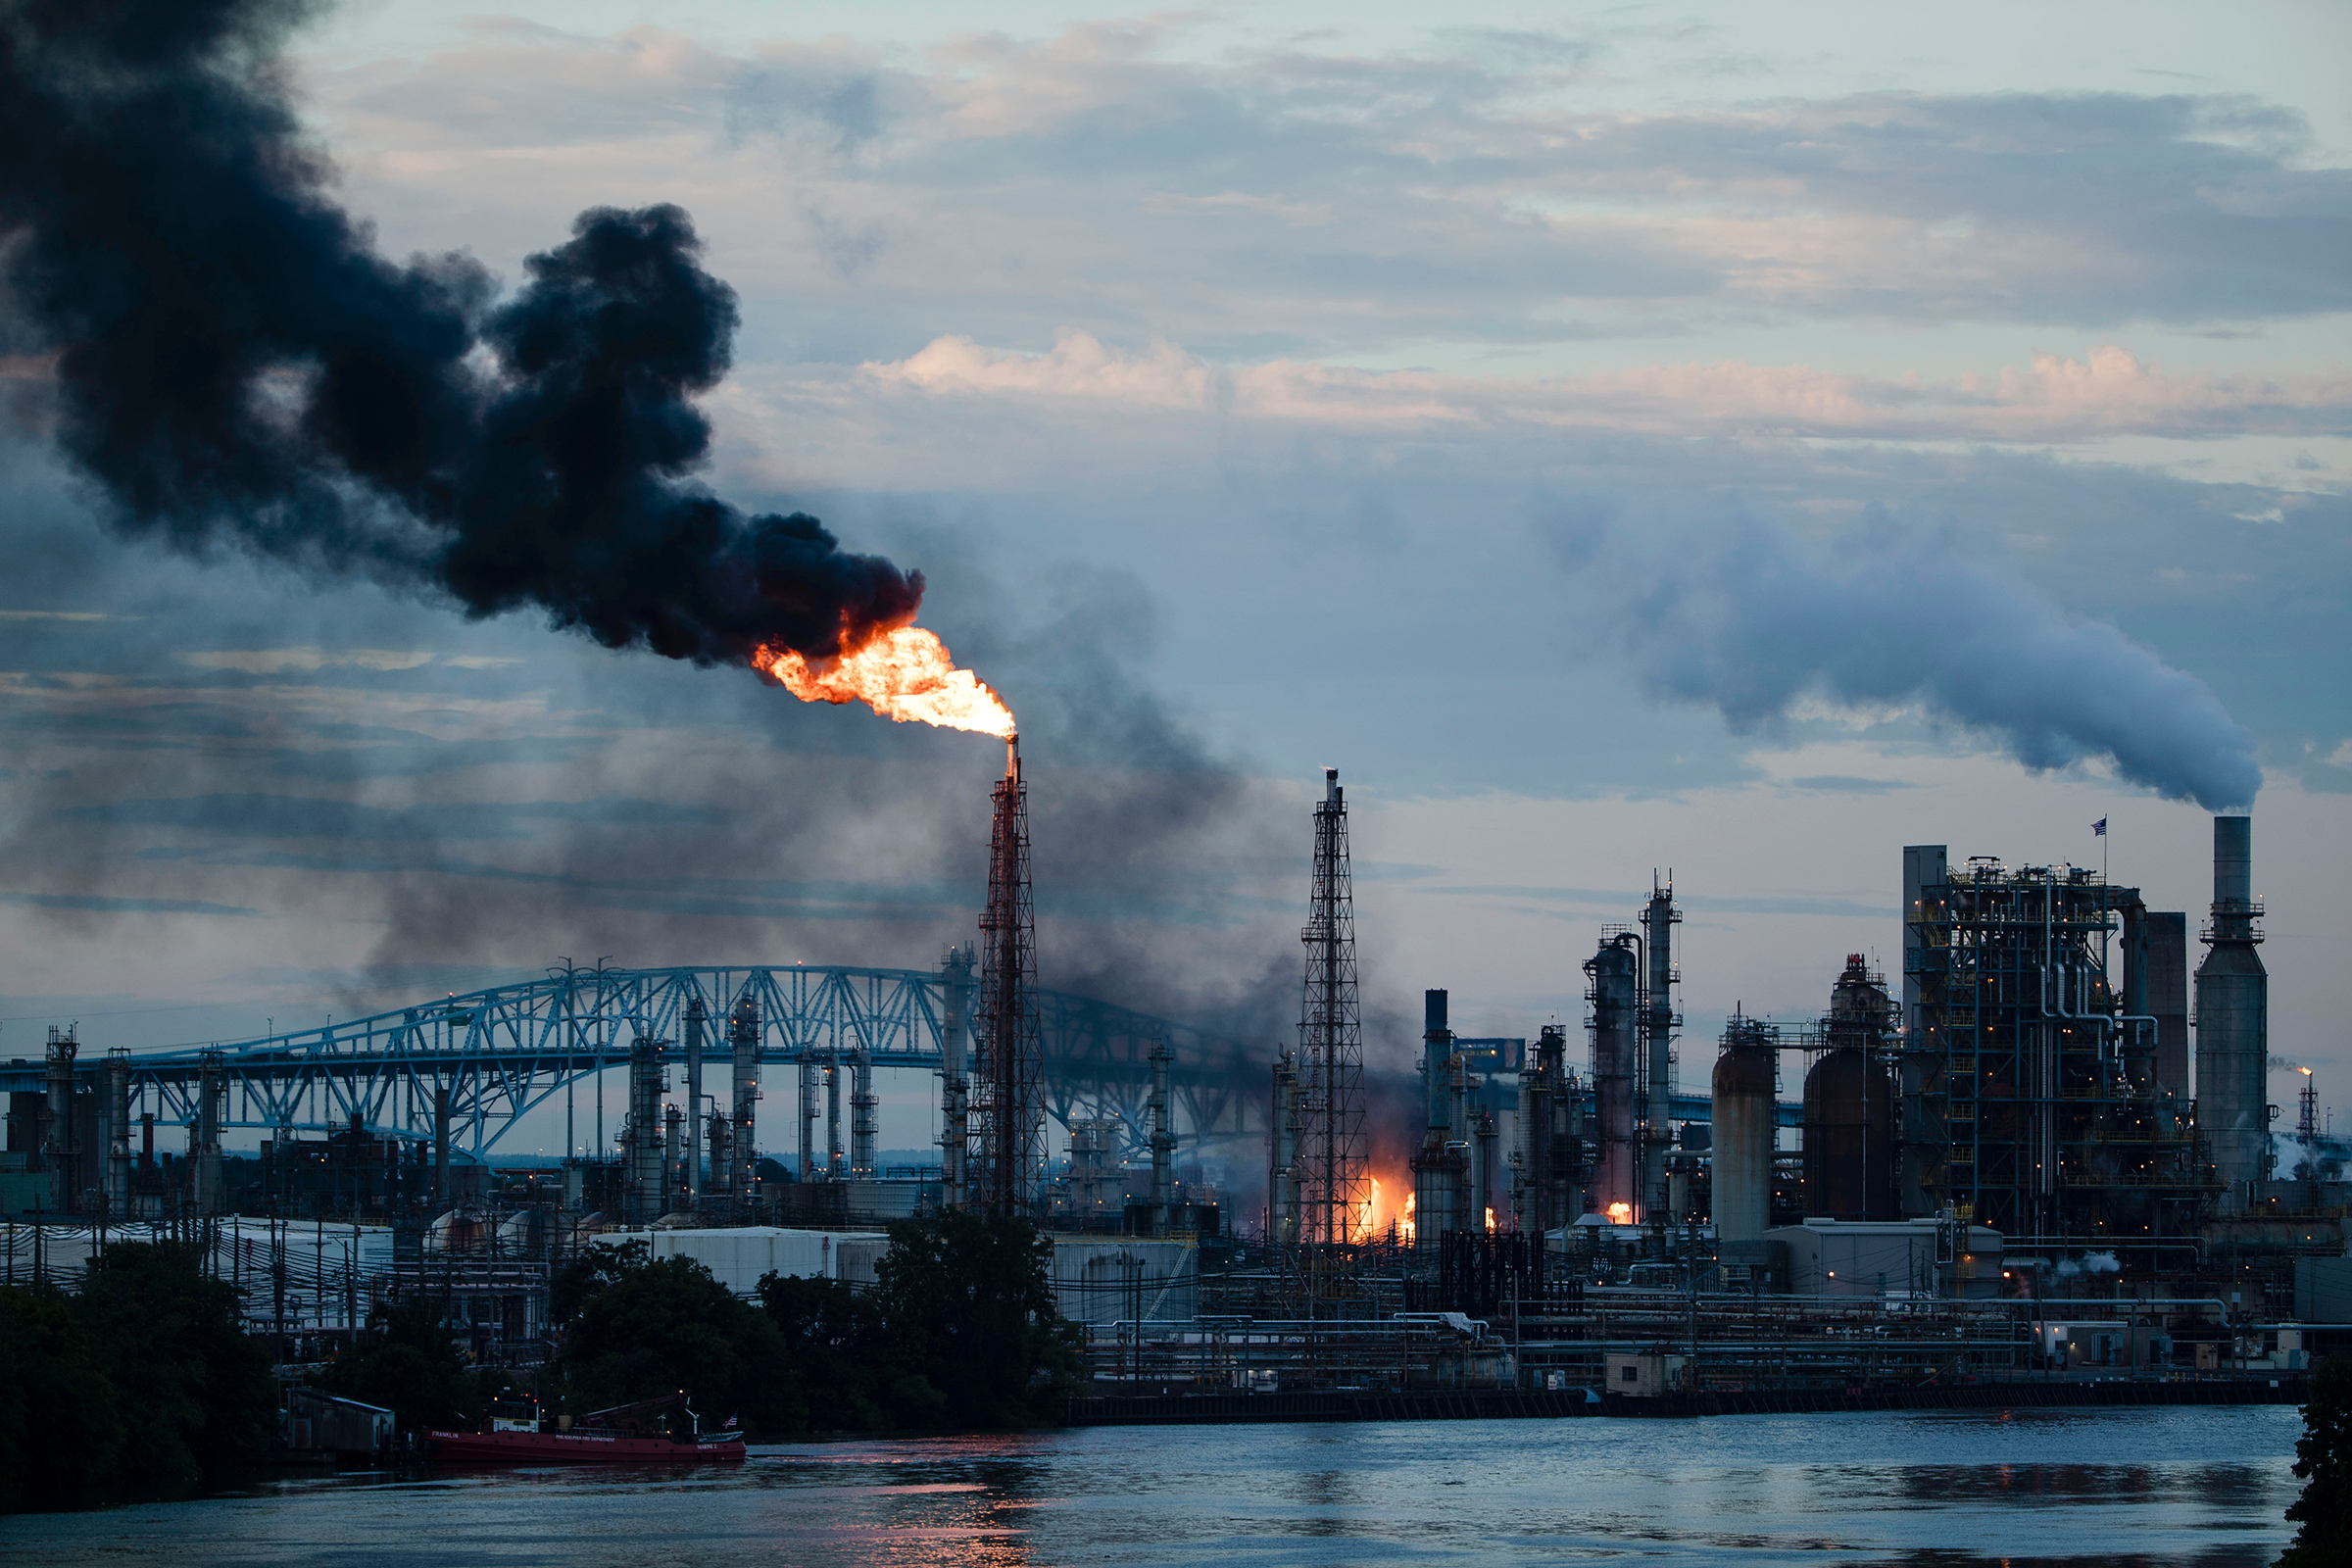 The Philadelphia Energy Solutions Refining Complex after catching fire on June 21, 2019